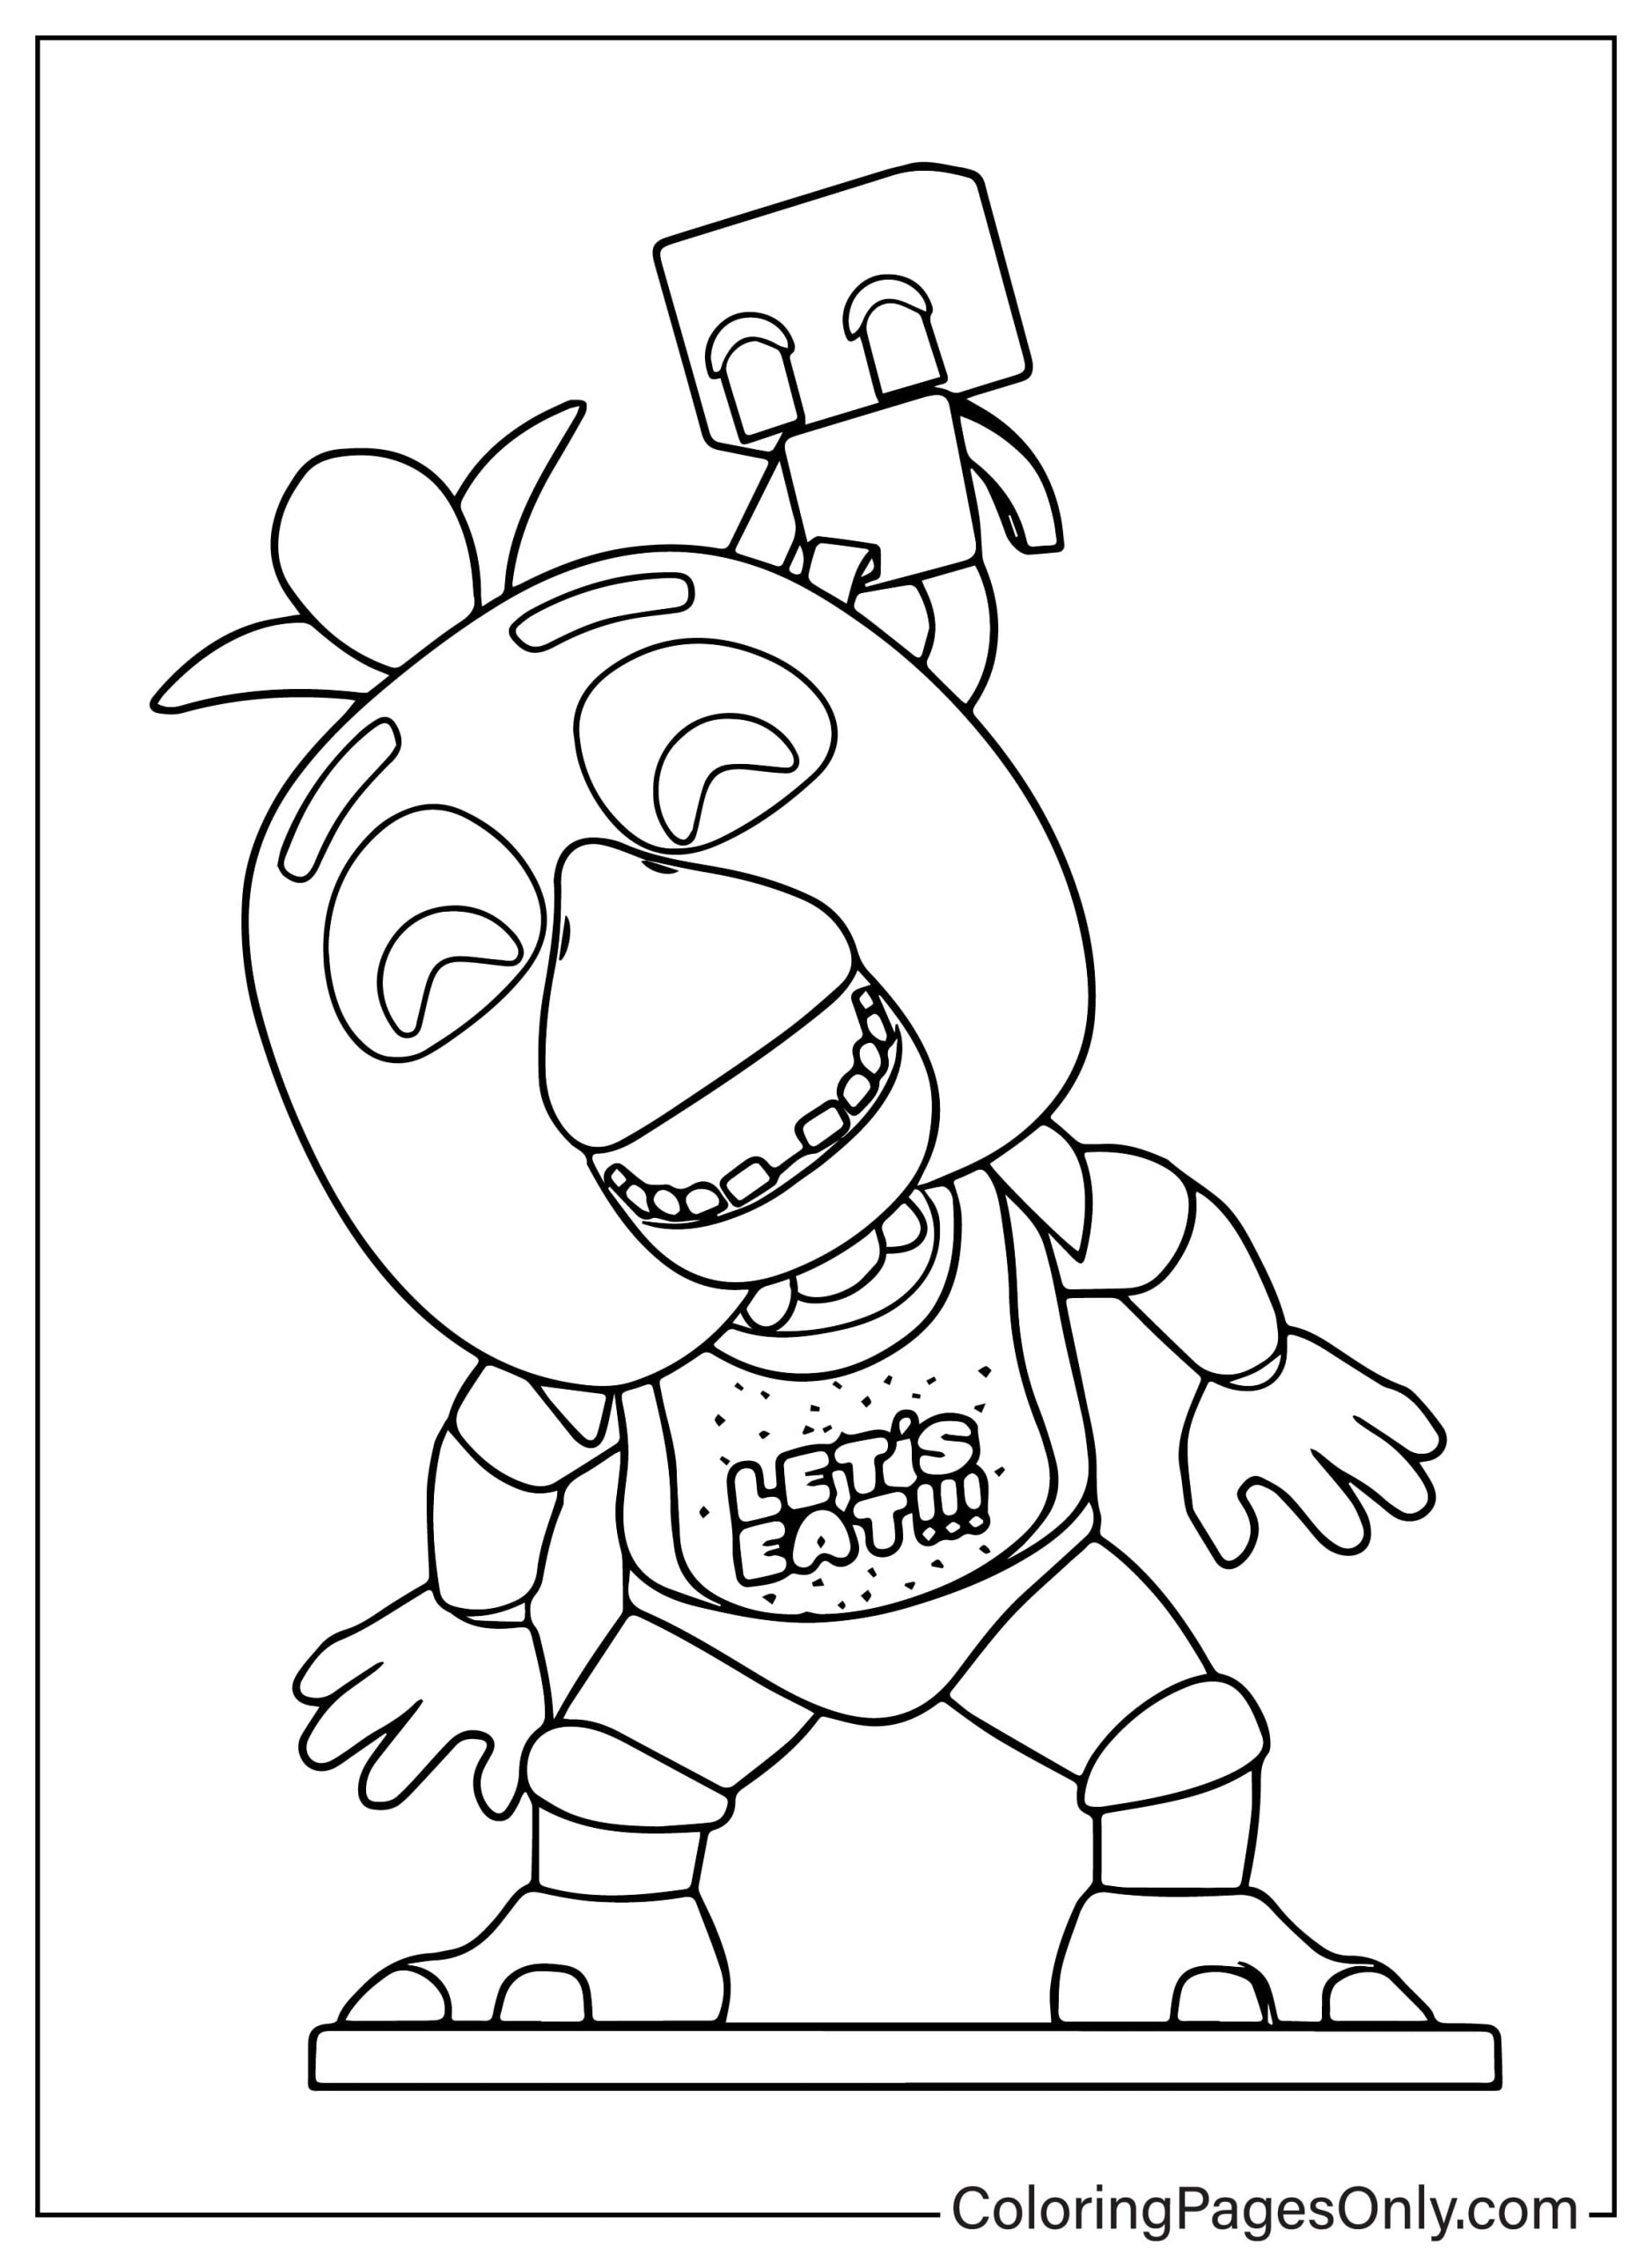 Chica Coloring Page from Five Nights At Freddy's 2